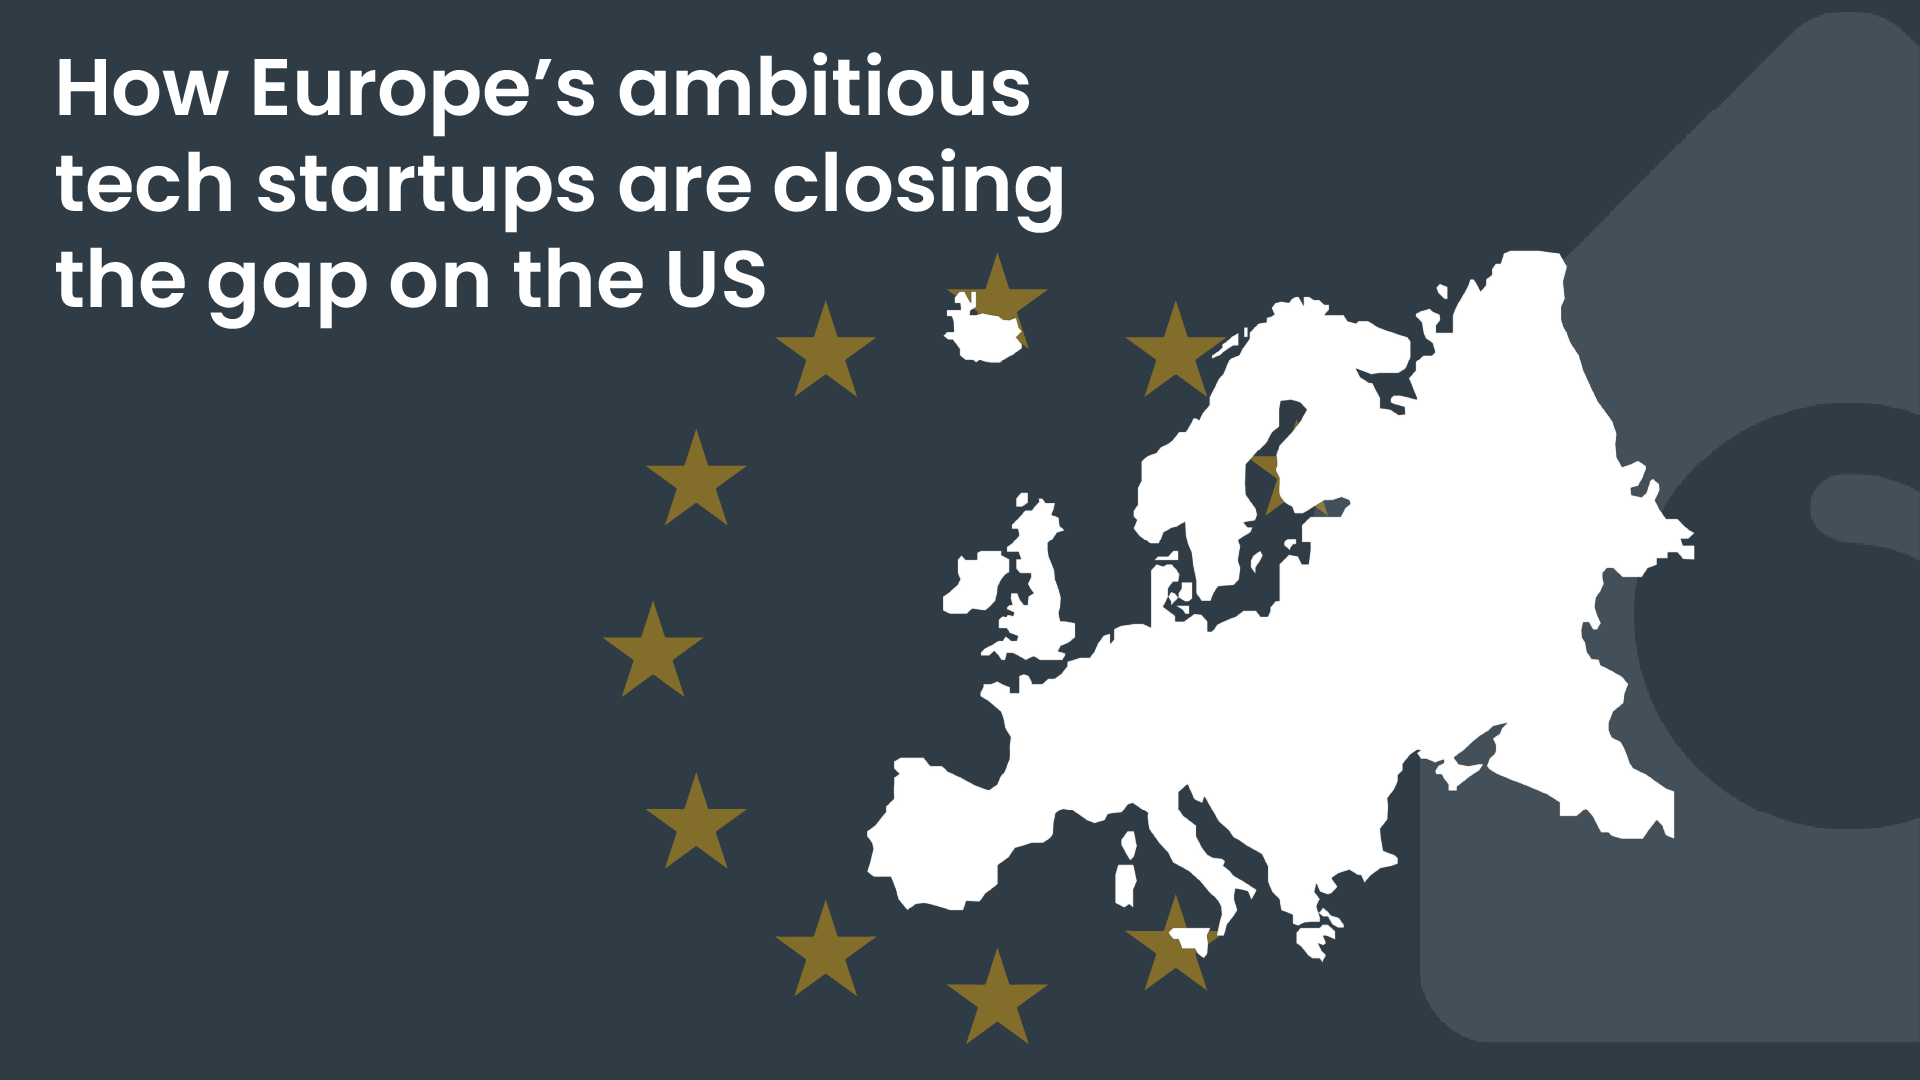 How Europe’s ambitious tech startups are closing the gap on the US